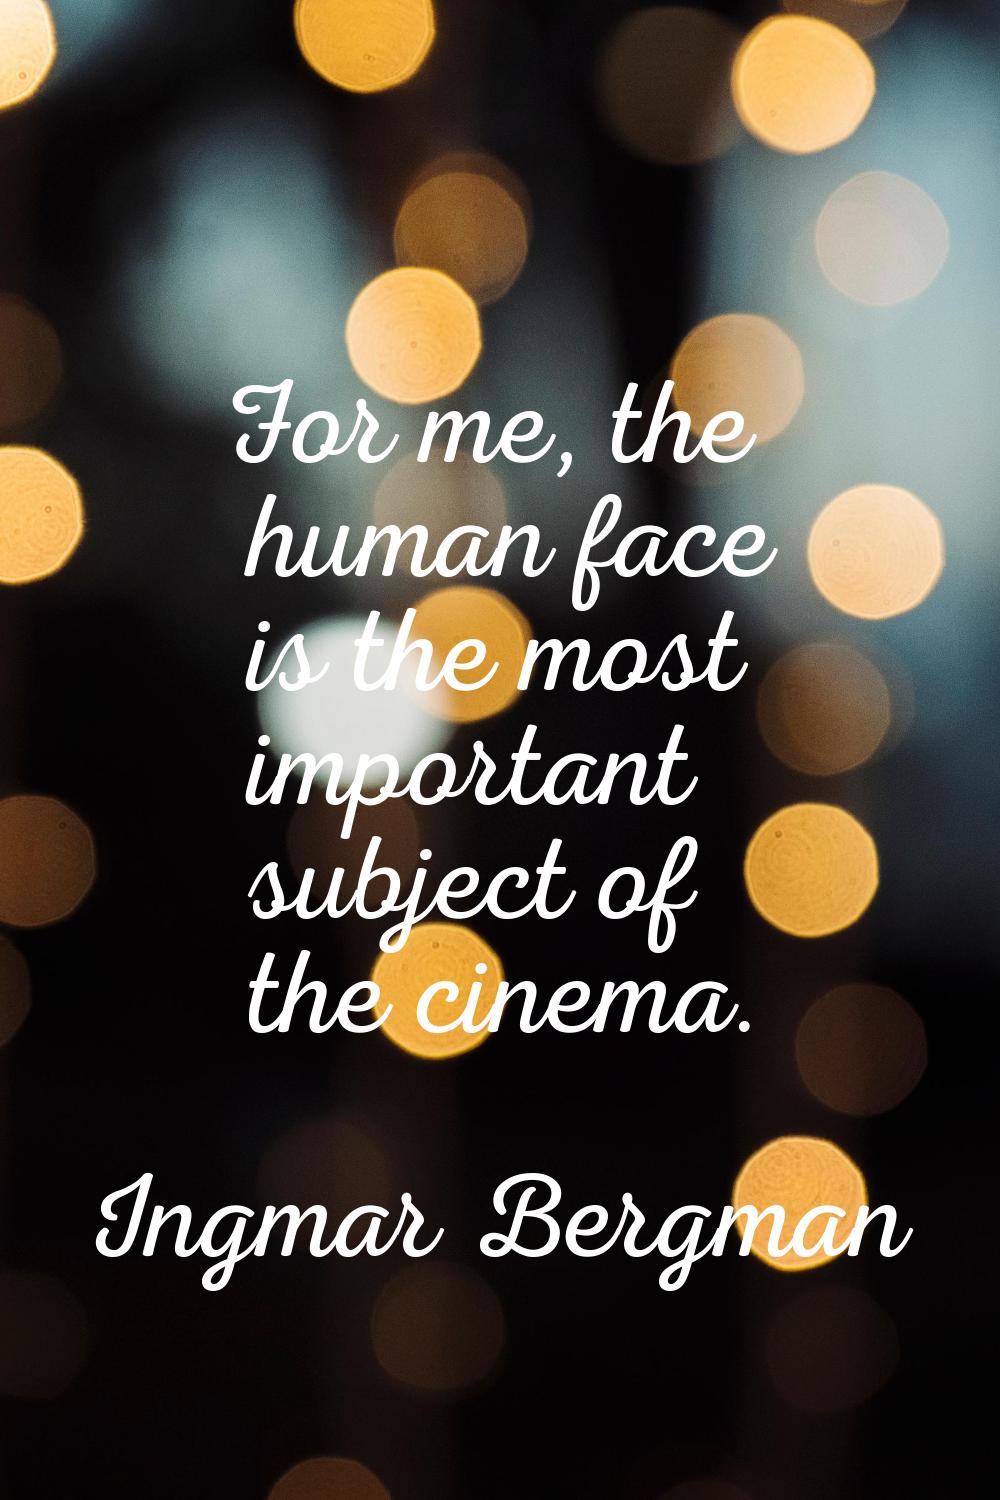 For me, the human face is the most important subject of the cinema.